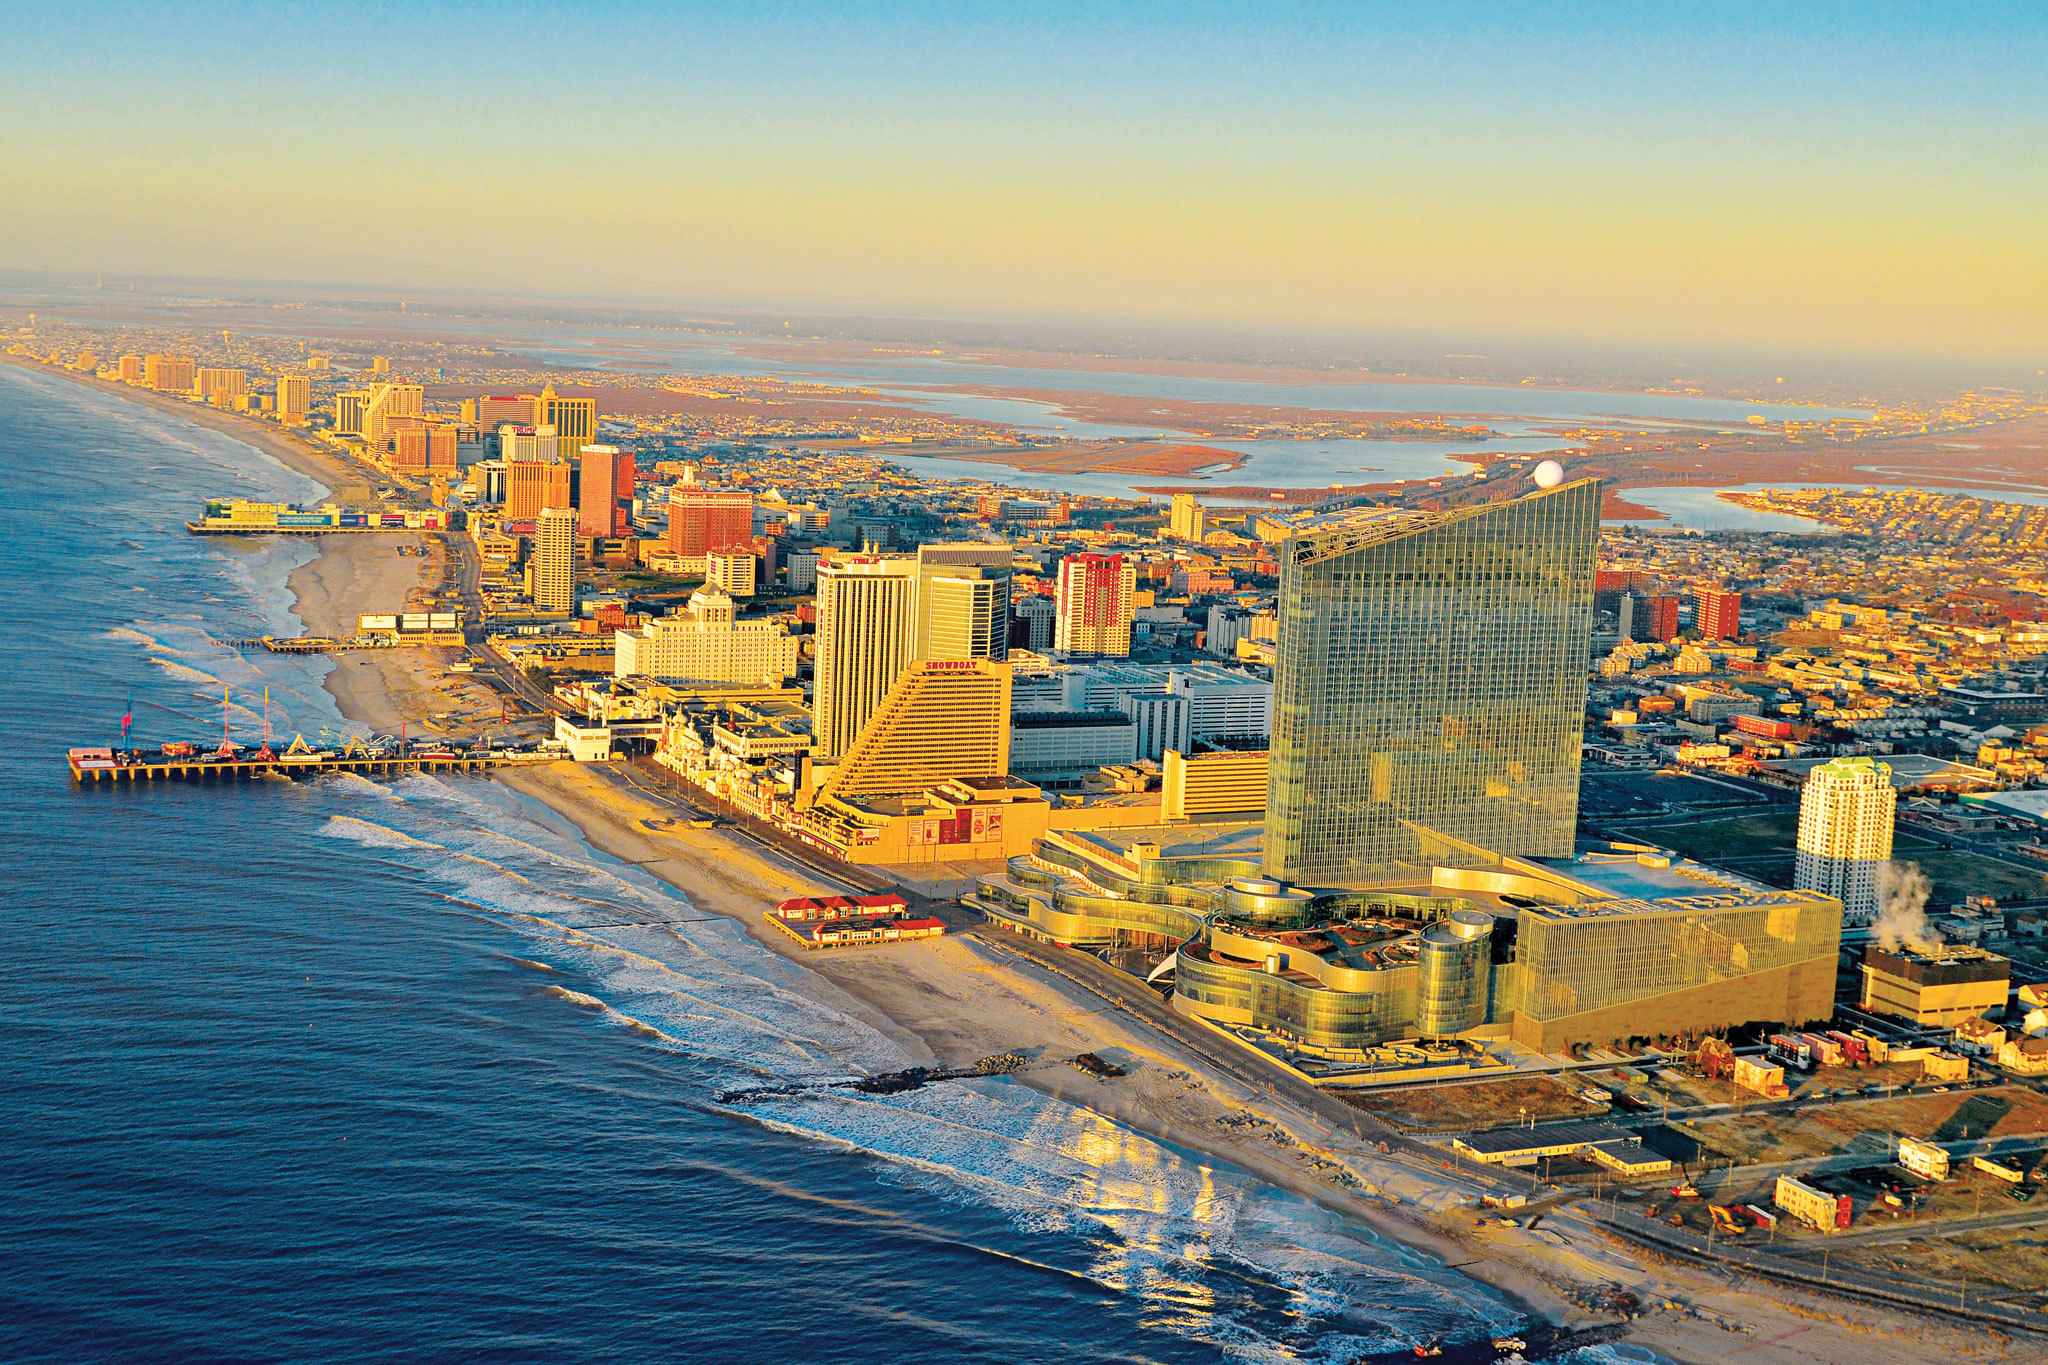 Guide to Atlantic City, NJ, including casinos, hotels and beaches